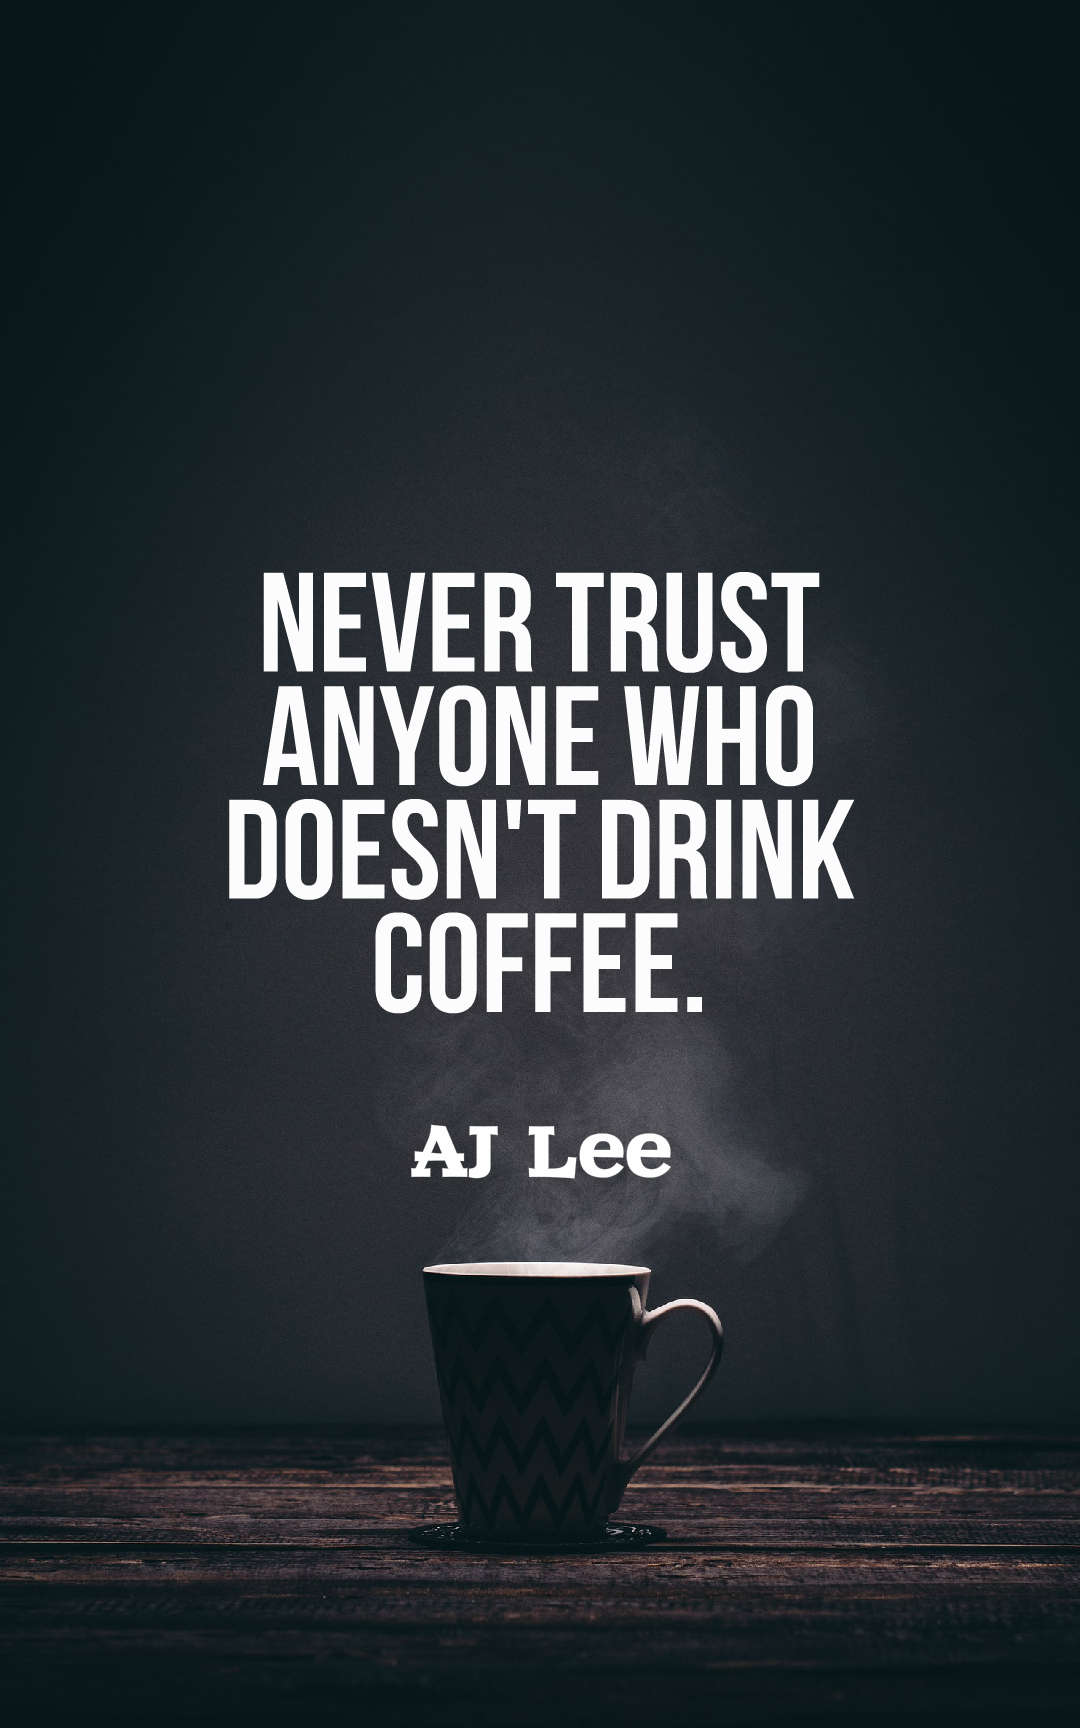 Never trust anyone who doesn't drink coffee.